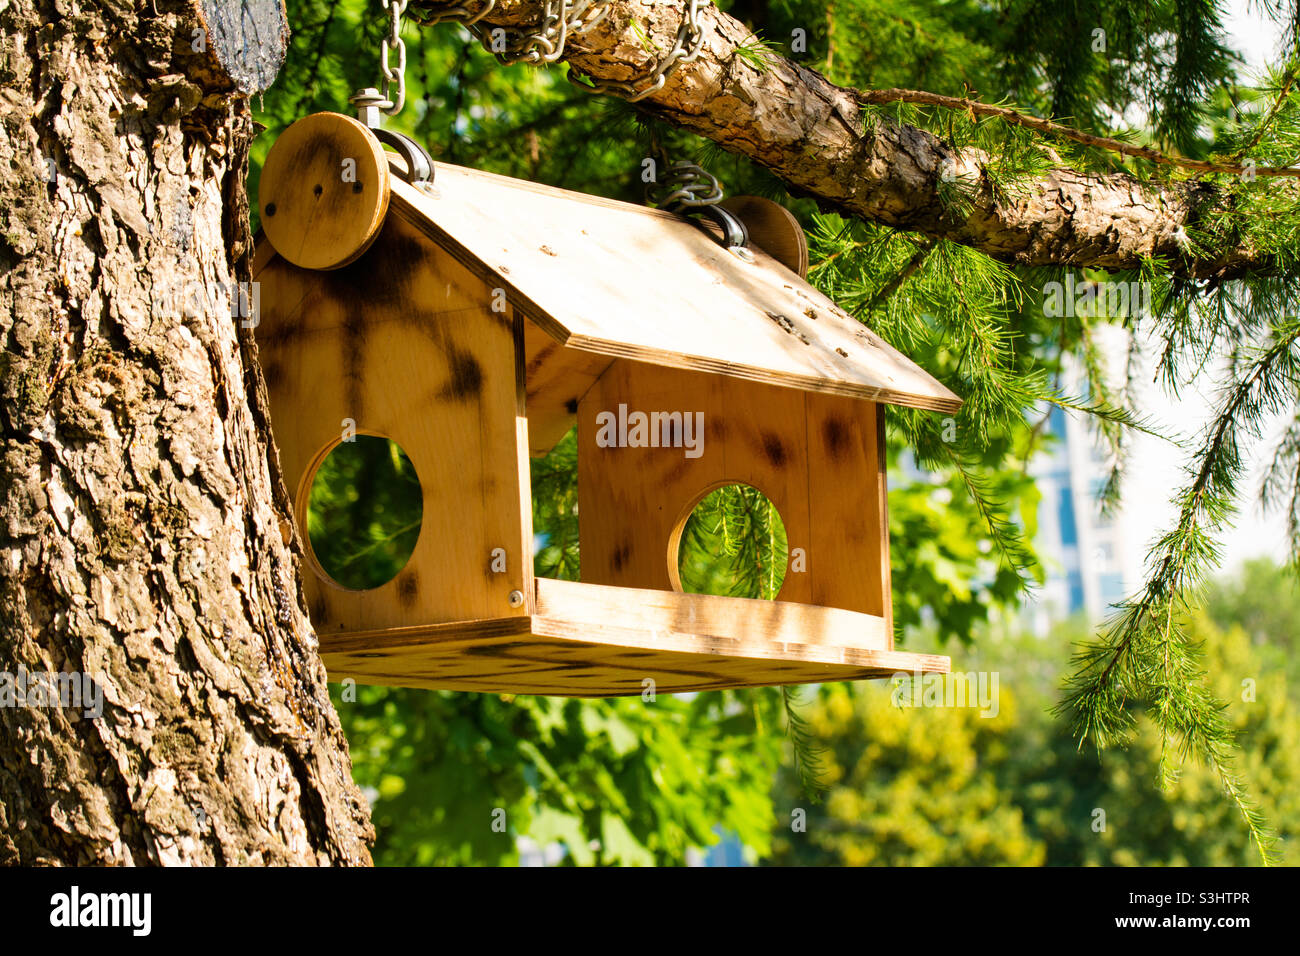 Homemade wooden bird feeder for birds and squirrels hanging on a tree on a warm sunny day Stock Photo